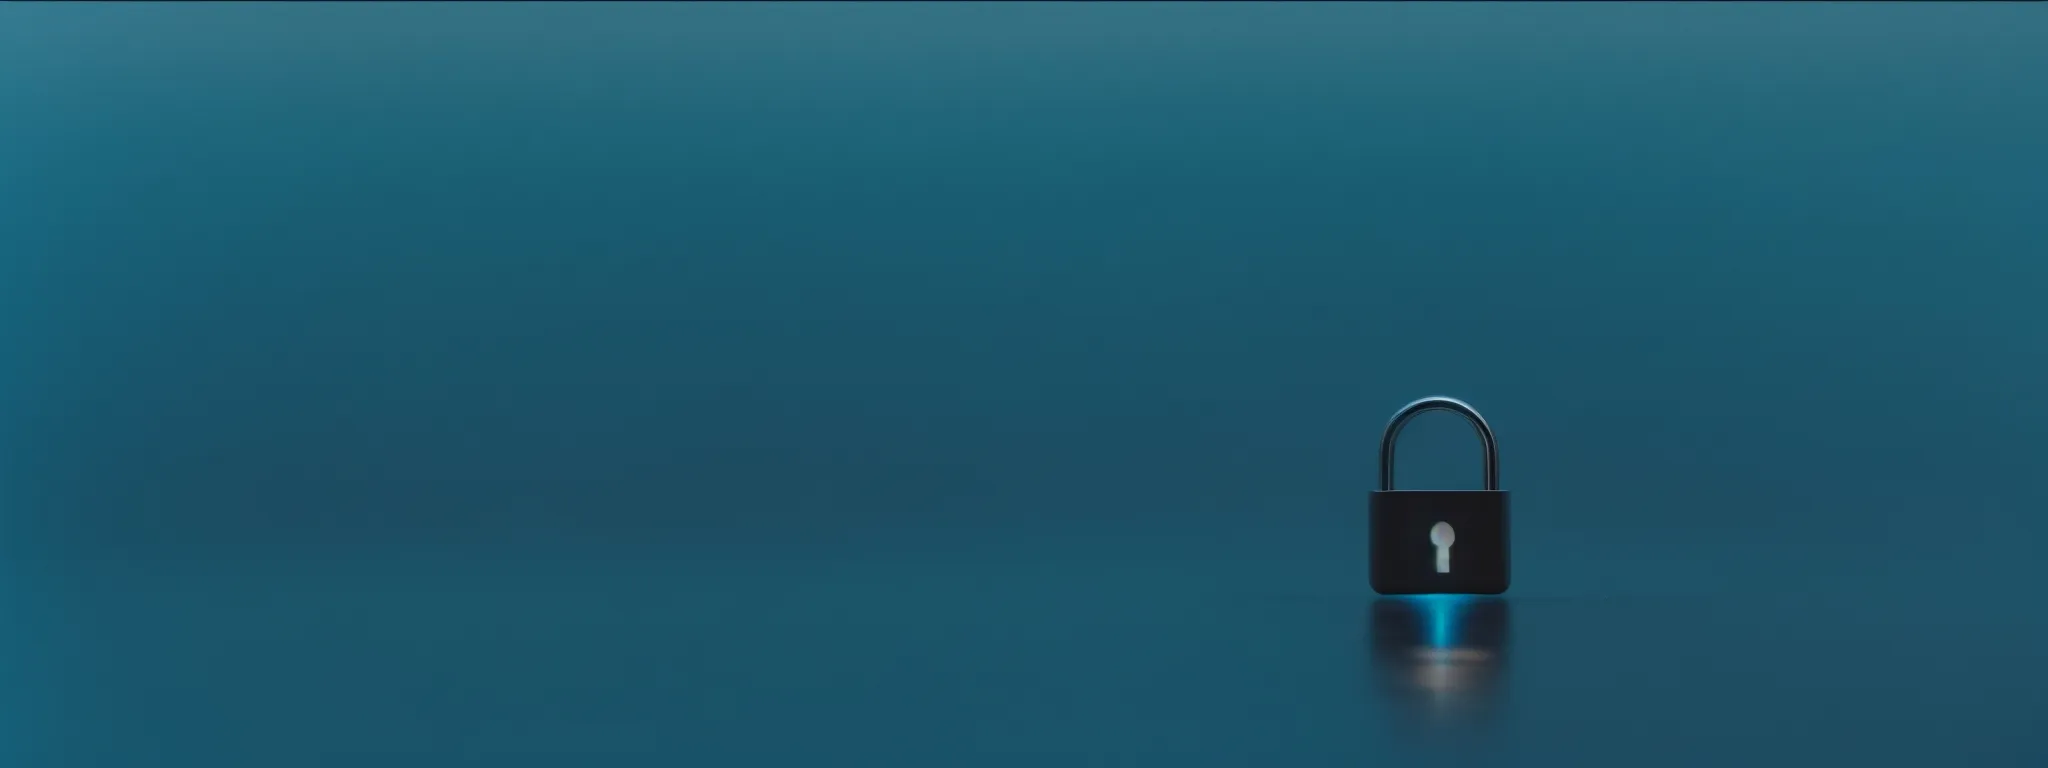 a lock icon overlay on a globe representing internet security and privacy.